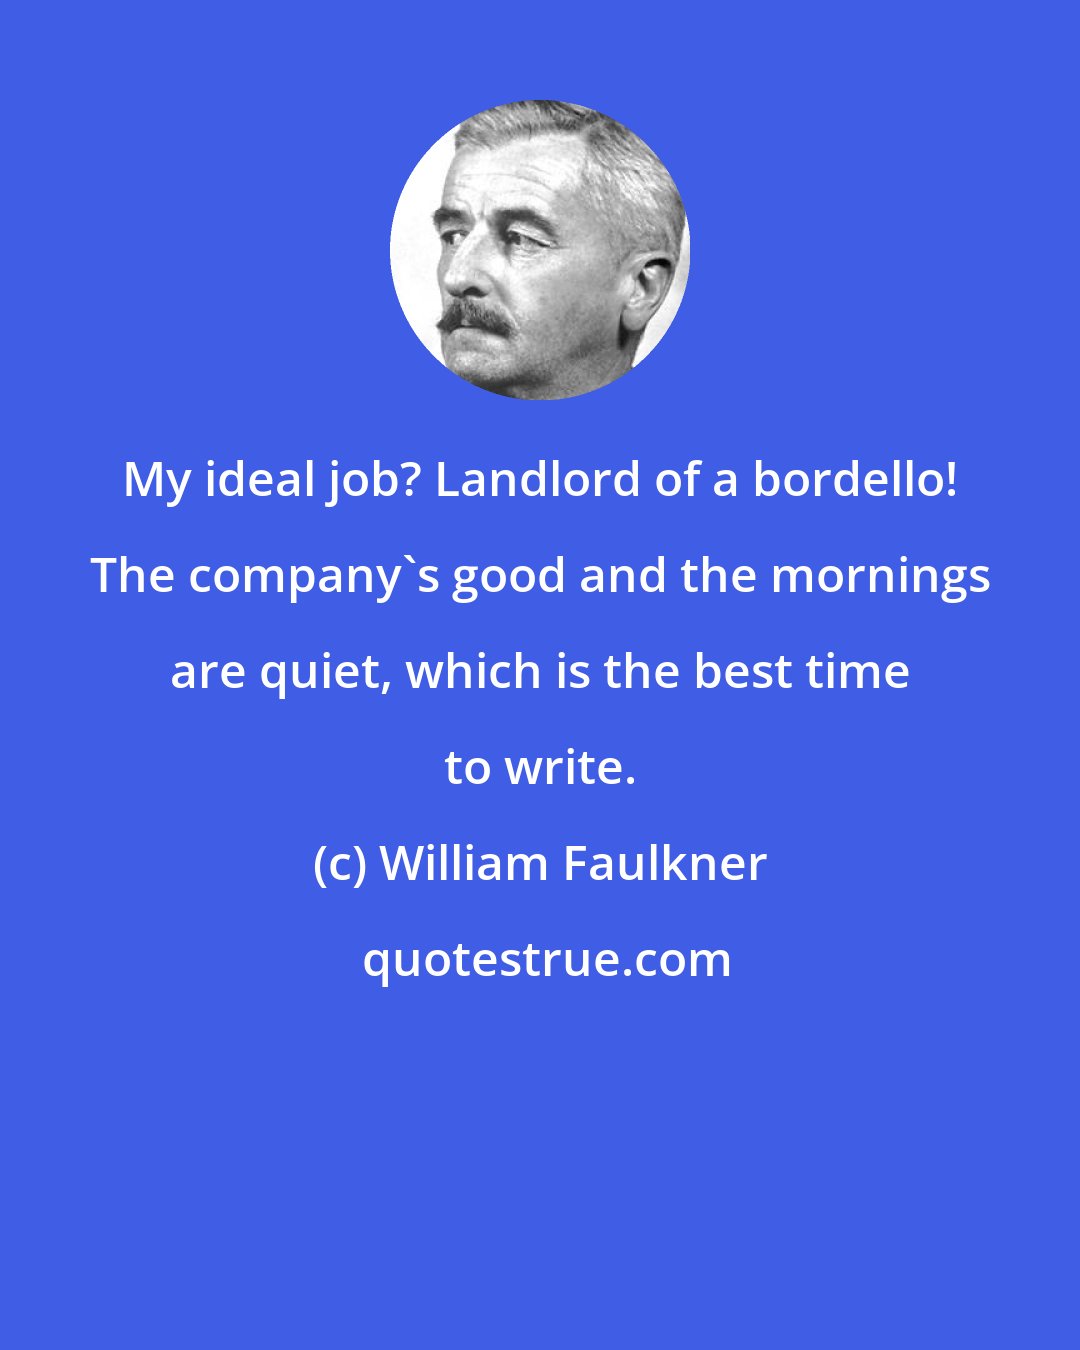 William Faulkner: My ideal job? Landlord of a bordello! The company's good and the mornings are quiet, which is the best time to write.